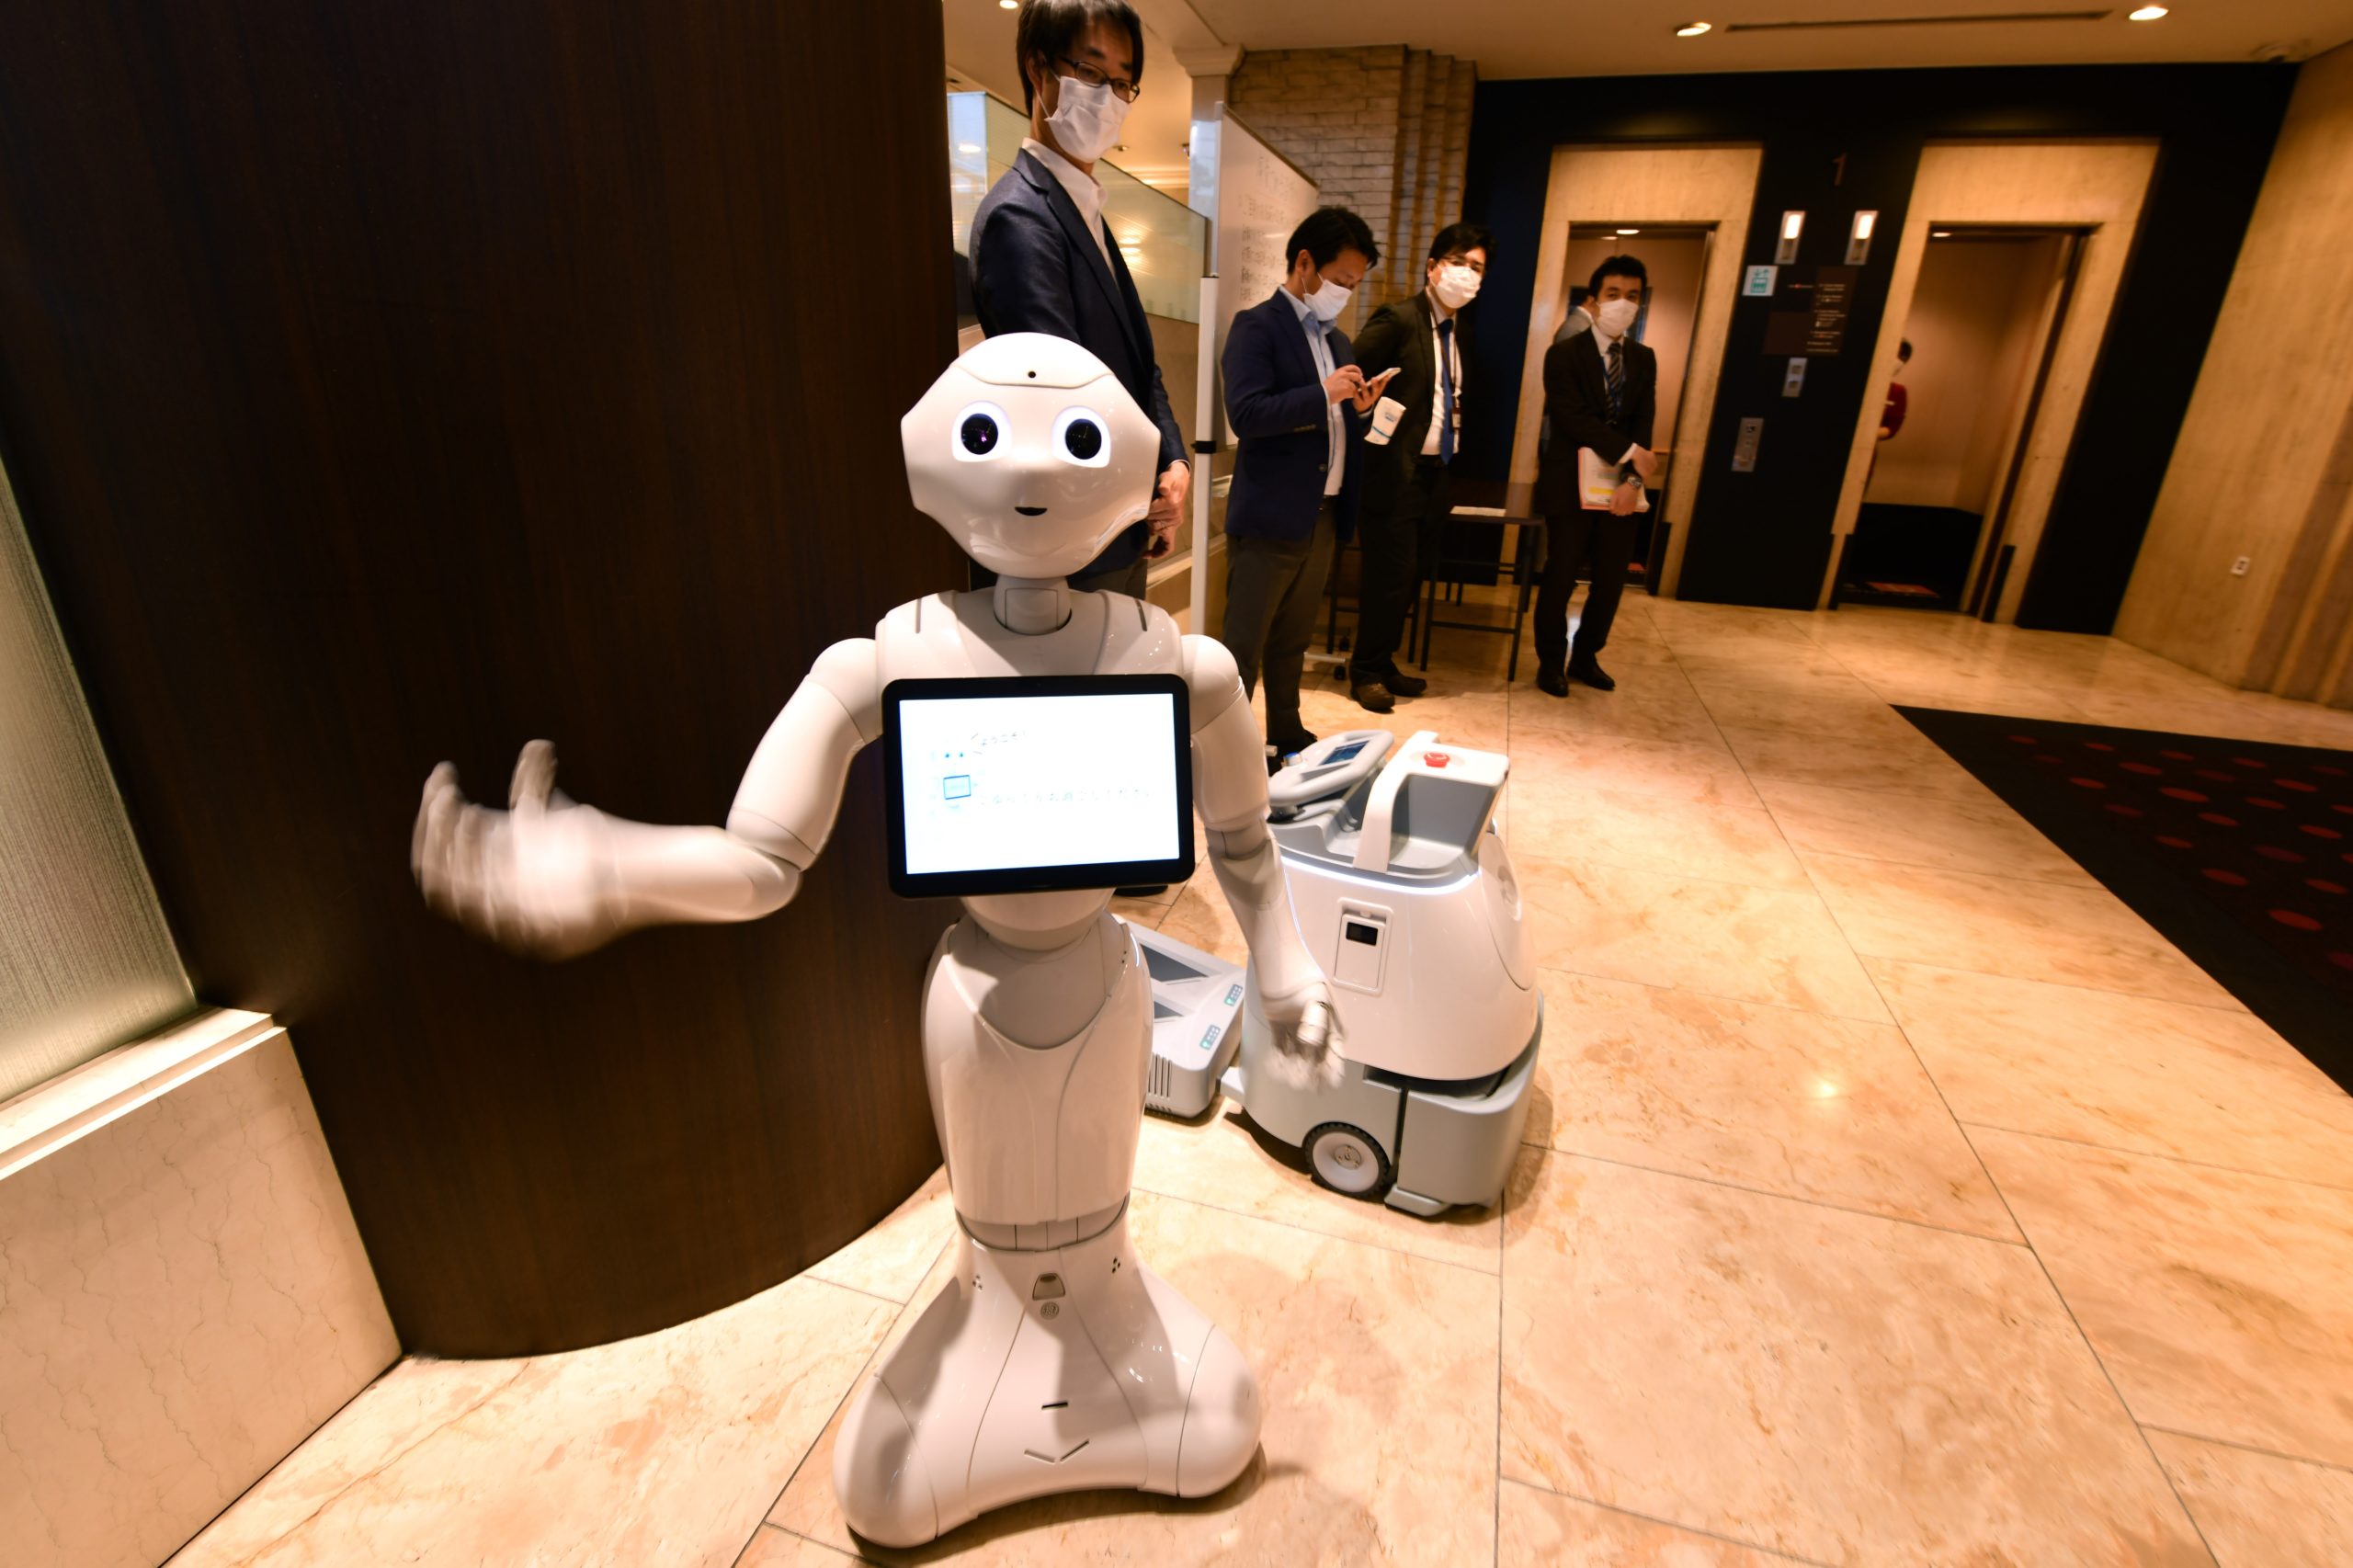  Pepper and cleaning robot Whiz are seen during a demonstration at the entrance of a hotel for patients suffering mild symptoms of covid-19 in Tokyo, Japan on April 30, 2020. (Photo: Kazuhiro Nogi, Getty Images)